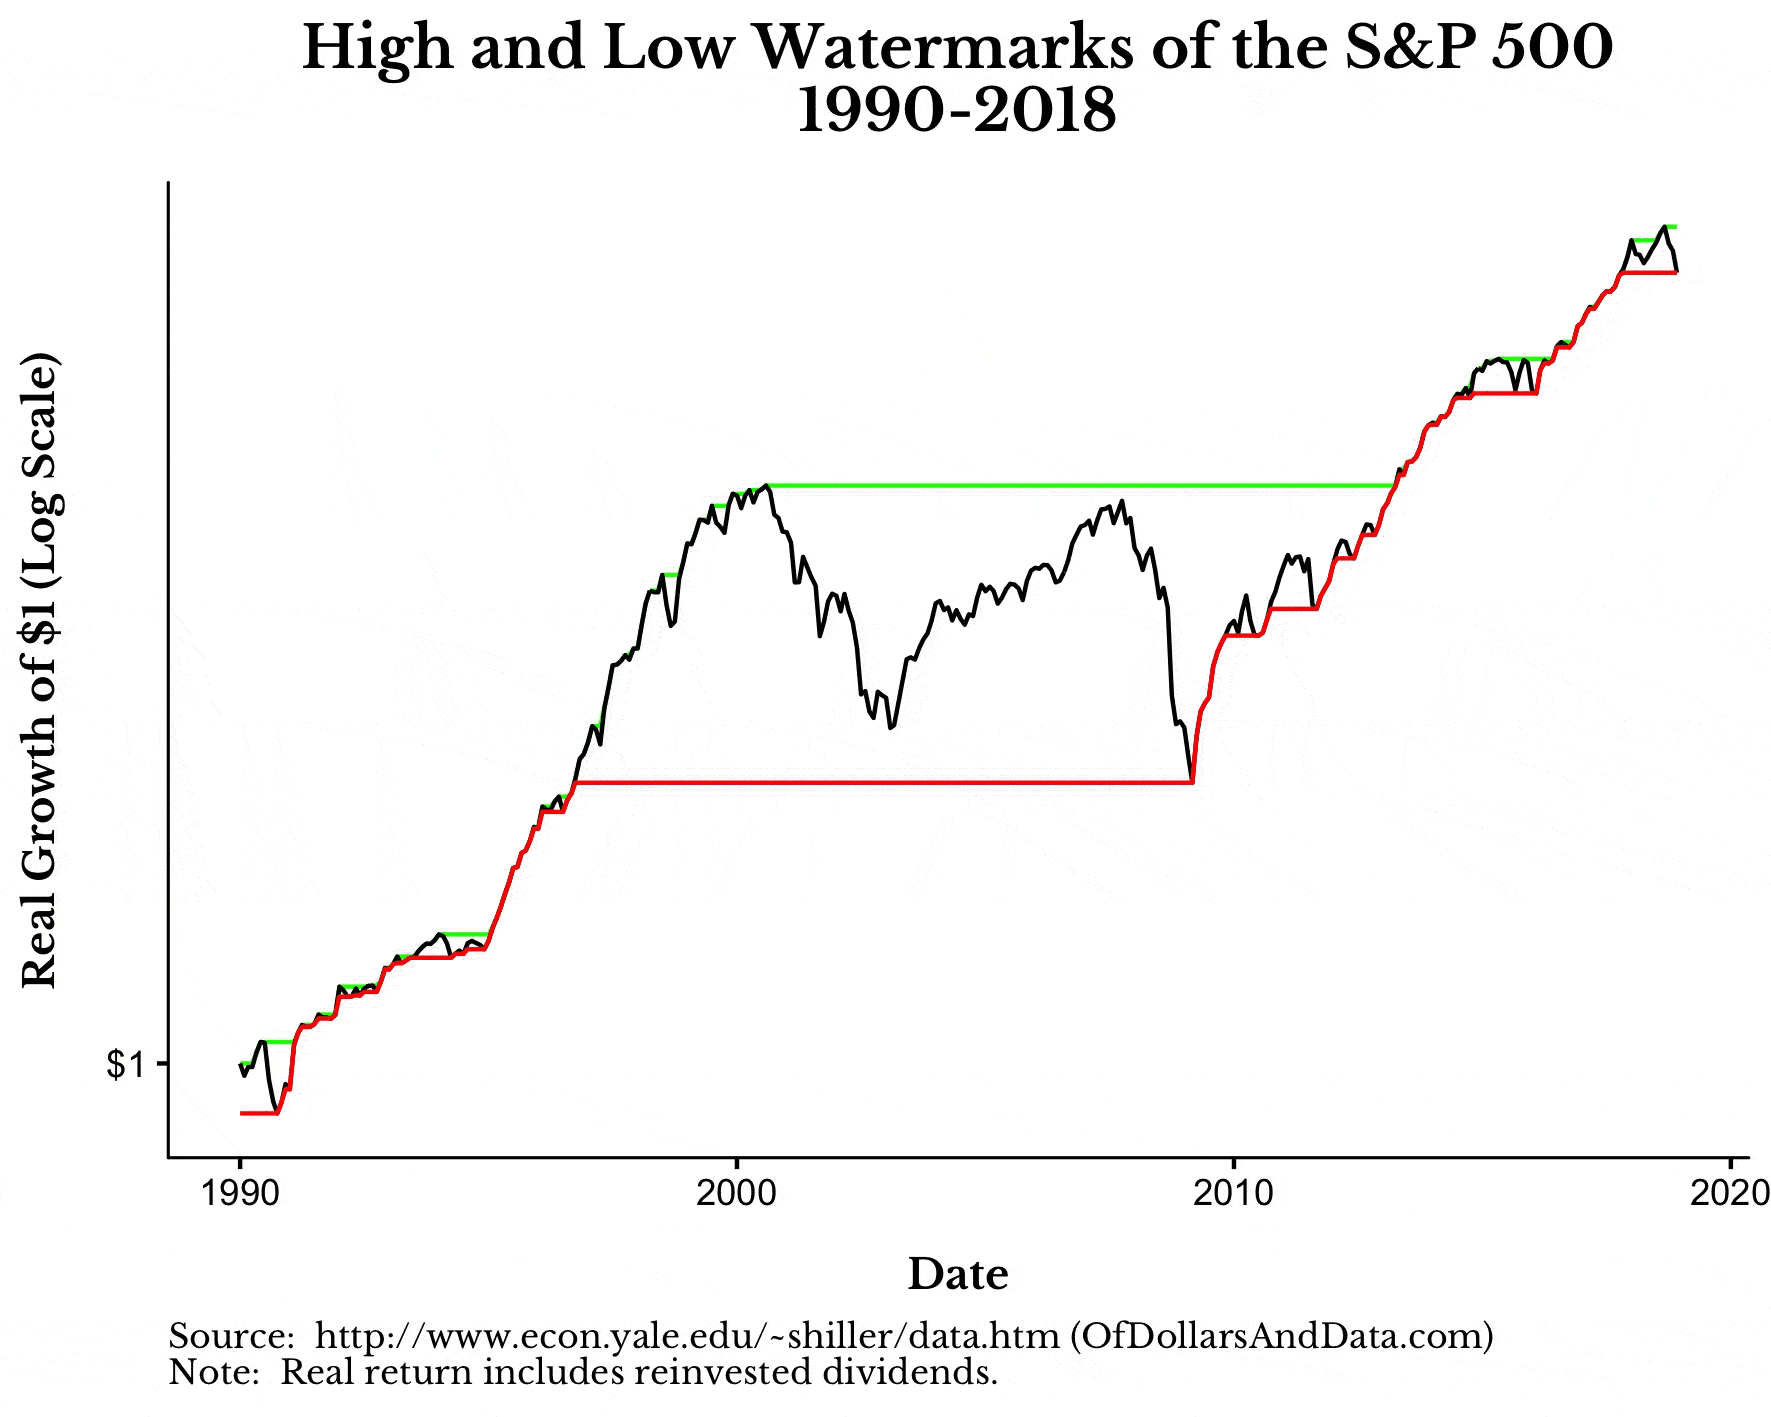 High and low watermarks for S&P 500 from 1990-2018 as a GIF